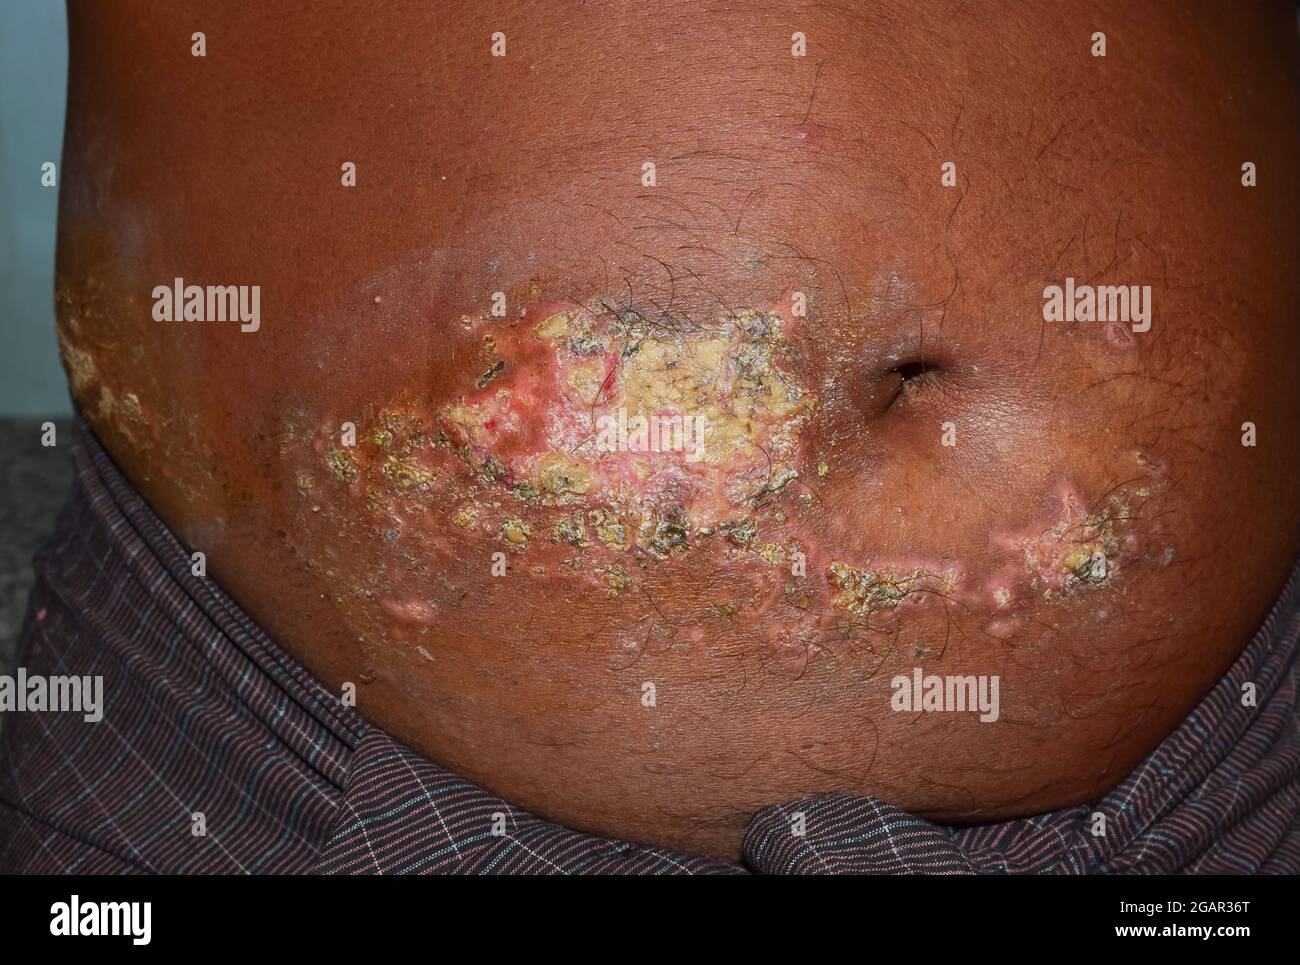 Chronic dermatitis or fungal infection in abdomen of Southeast Asian man. Stock Photo